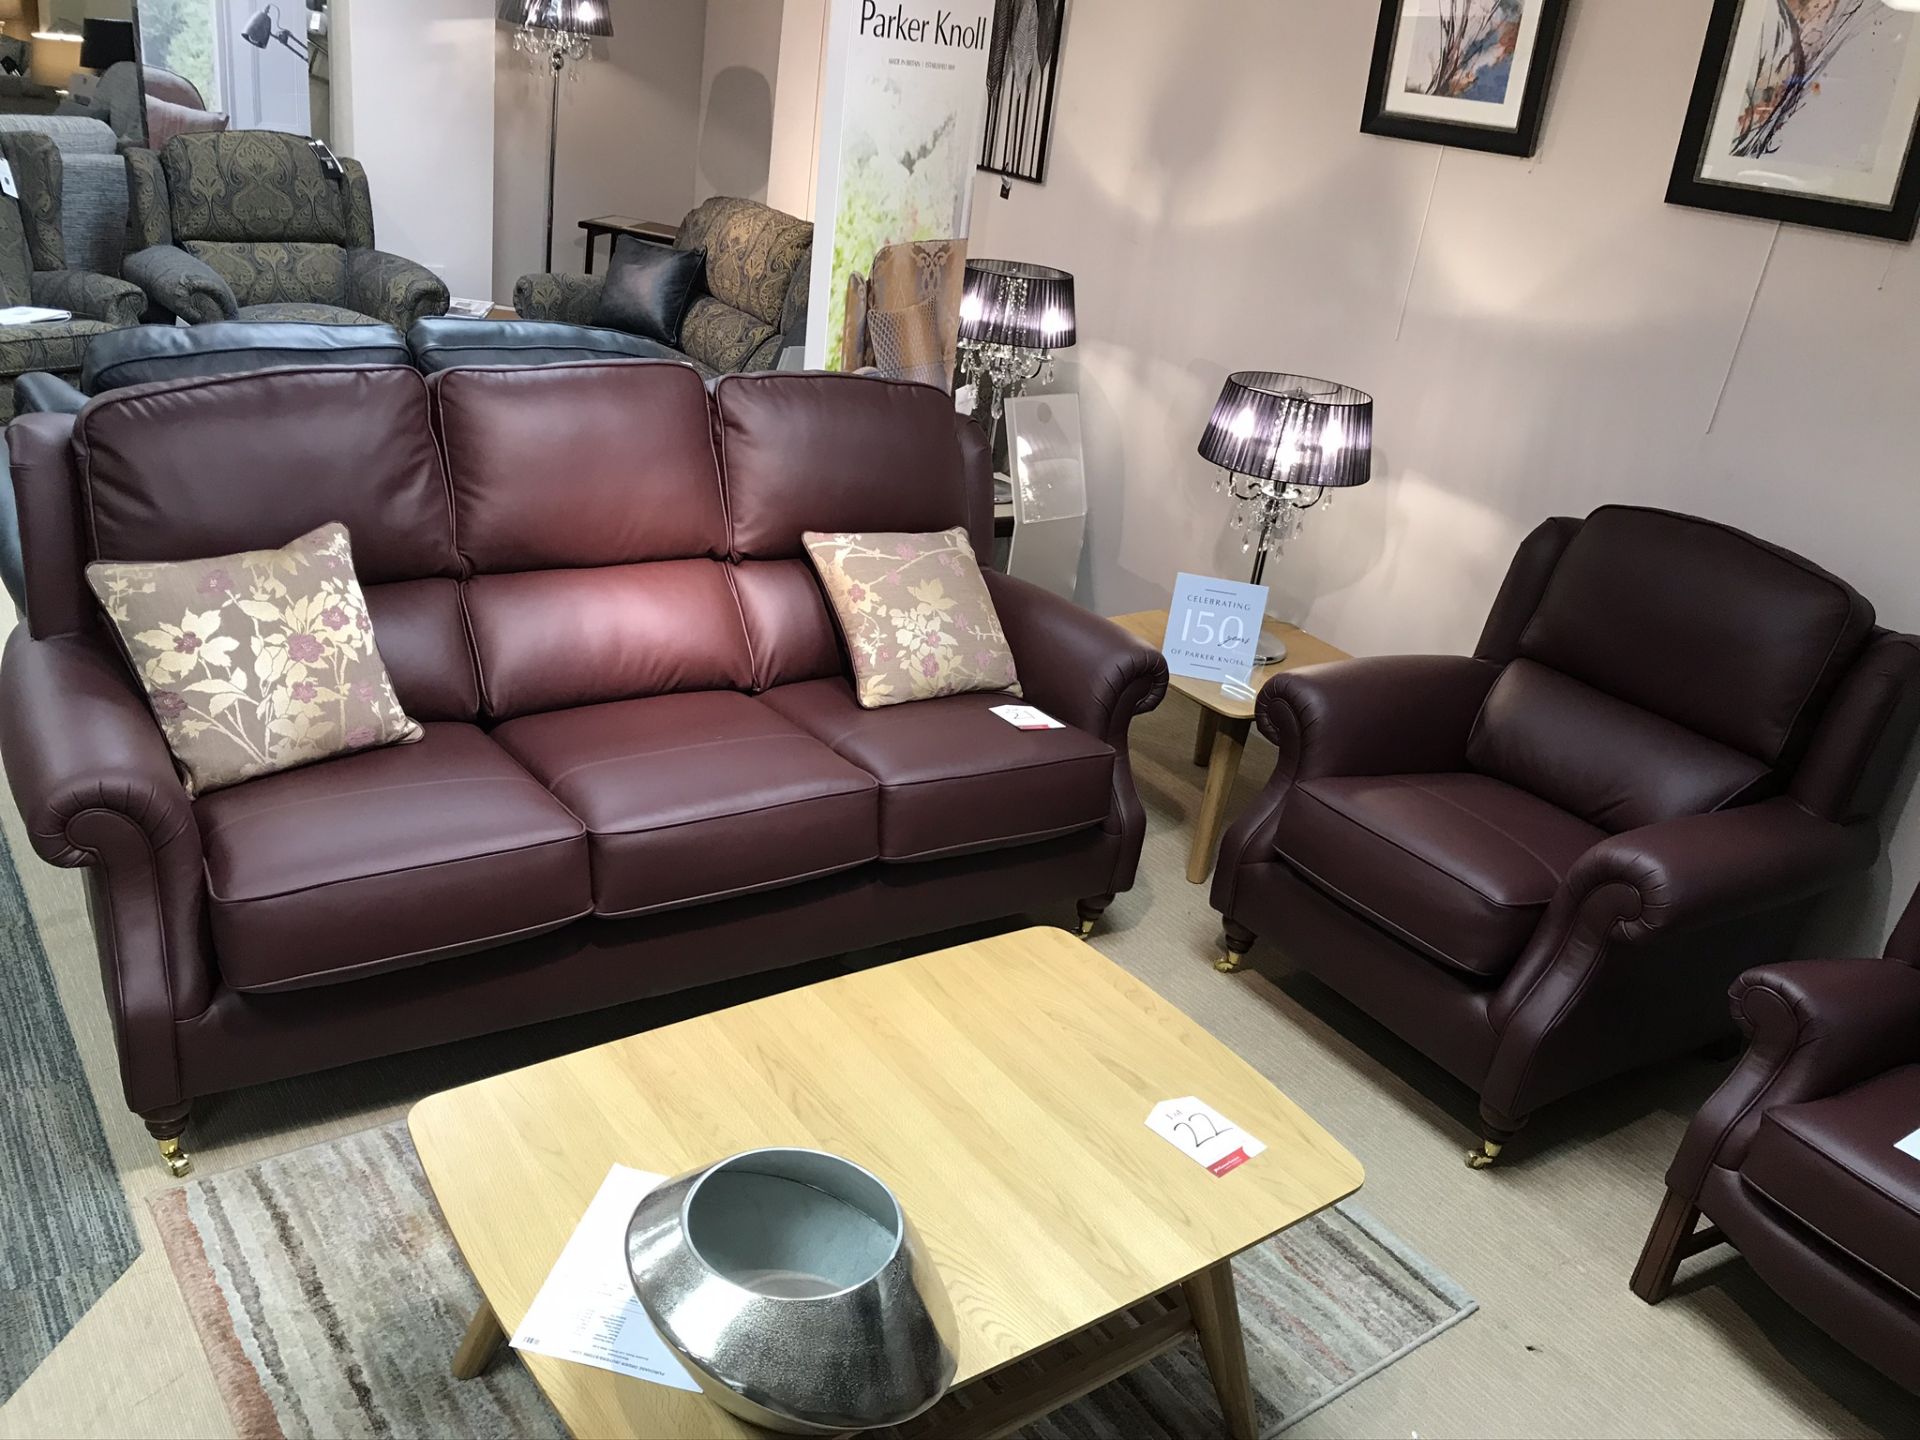 Ex Display Parker Knoll Oakham 3 Seater Sofa & Armchair - Como Conker Leather - Foam Seats - RRP£5,4